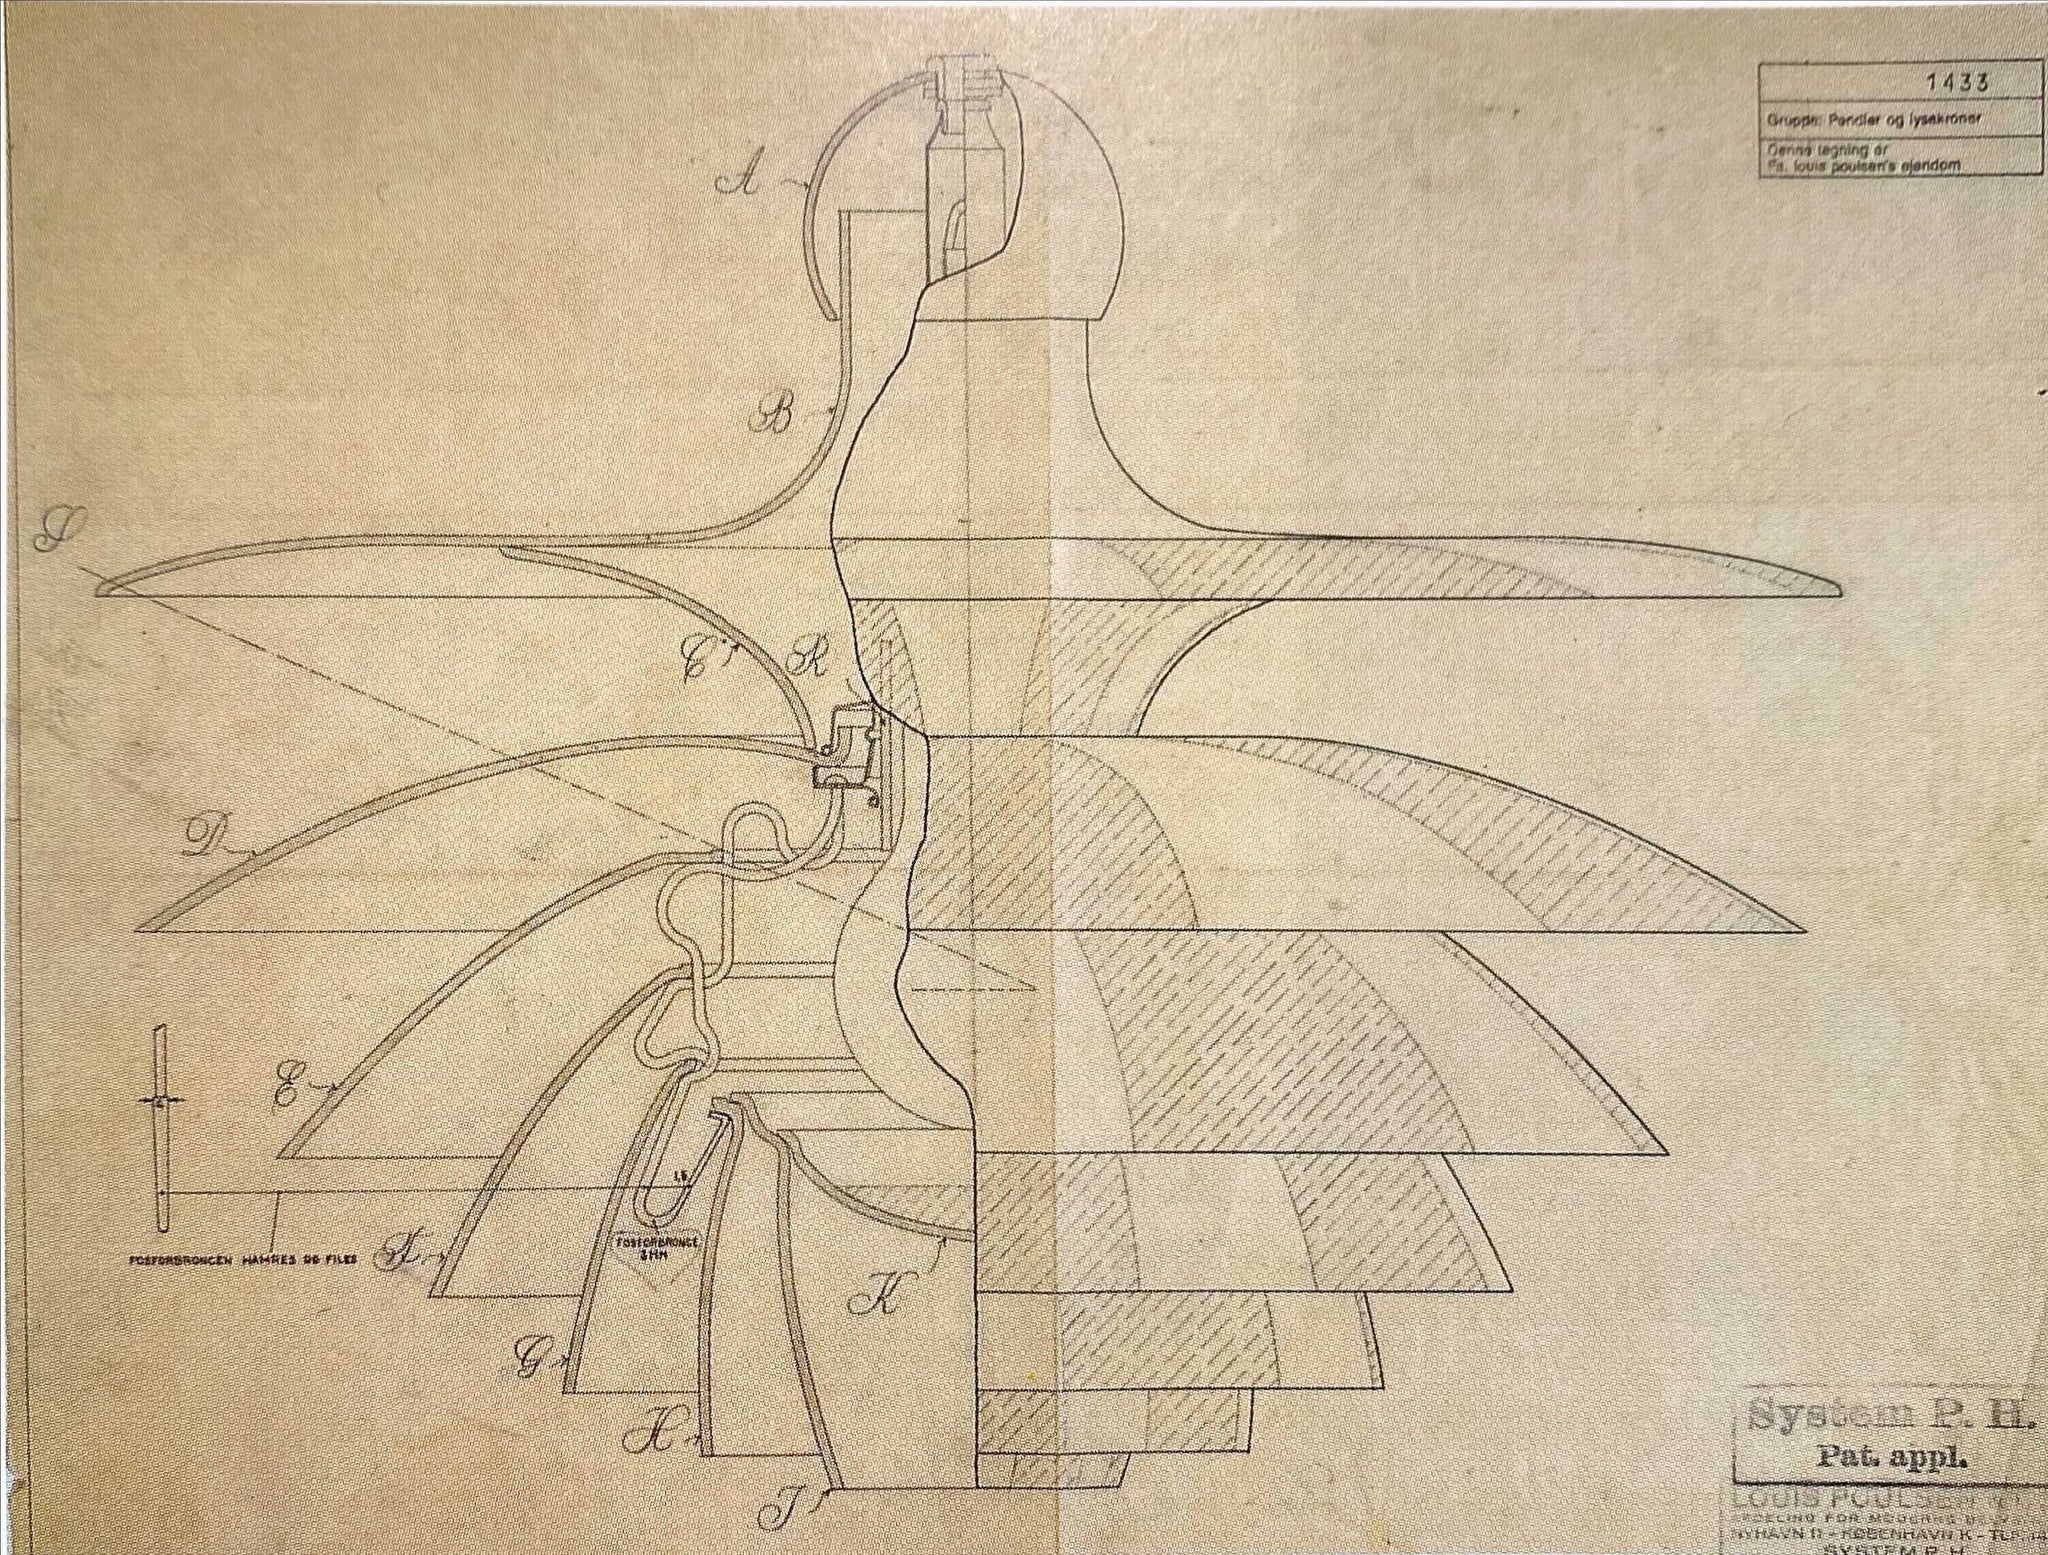 Septima drawing by Poul Henningsen